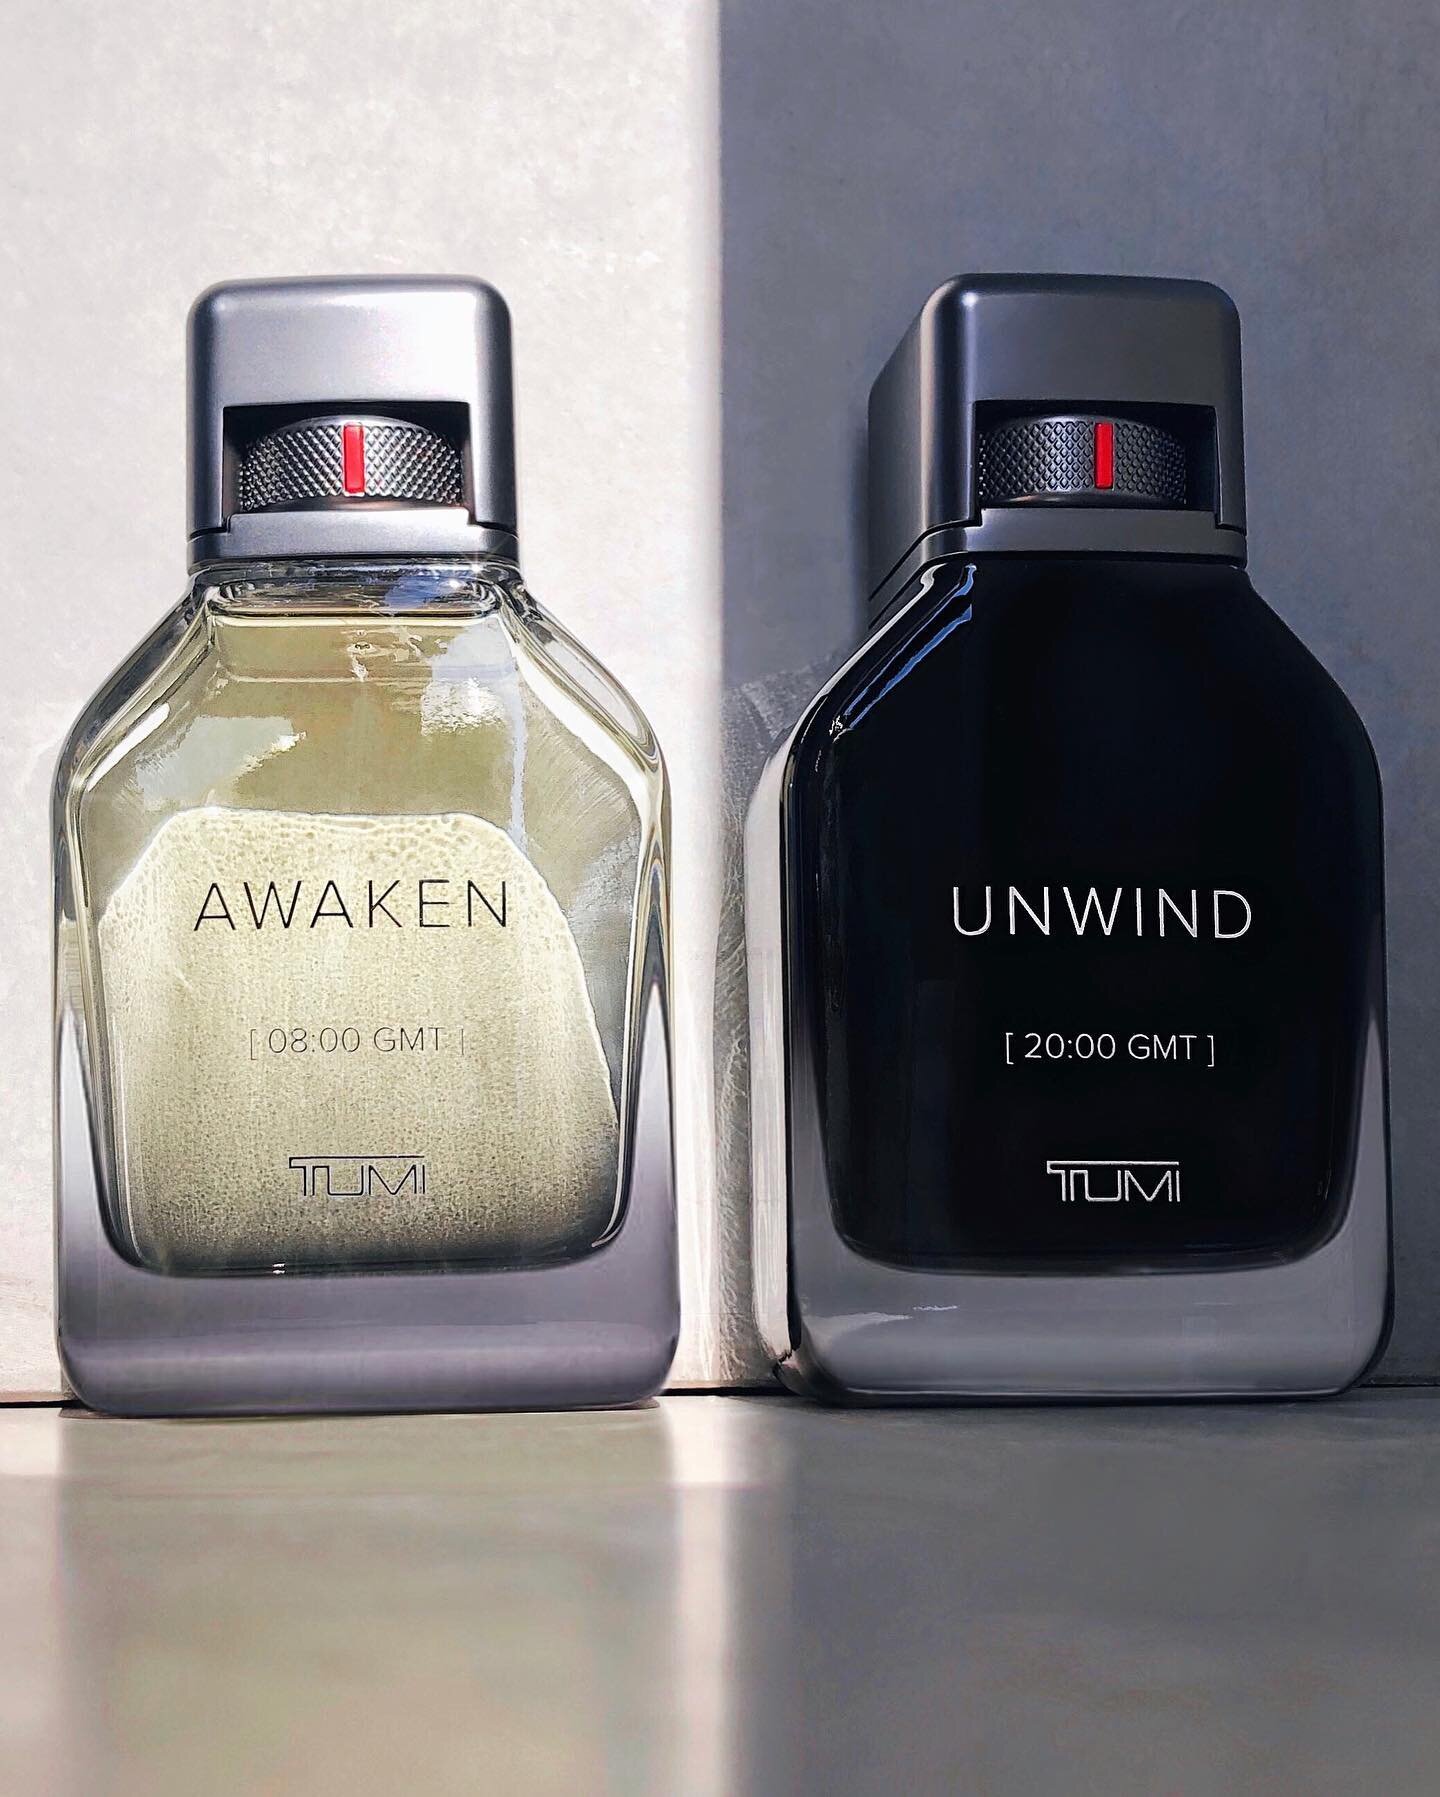 Check out these new @tumitravel fragrances by @fragrancegroup that just launched 🌗✨ #TheFragranceGroup #TumiFragrances #Tumi 
. 
. 
. 
. 
. 
. 
#productphotographer #contentcreators #contentcreation #fragrancecollection #fragrancephotography #evenin